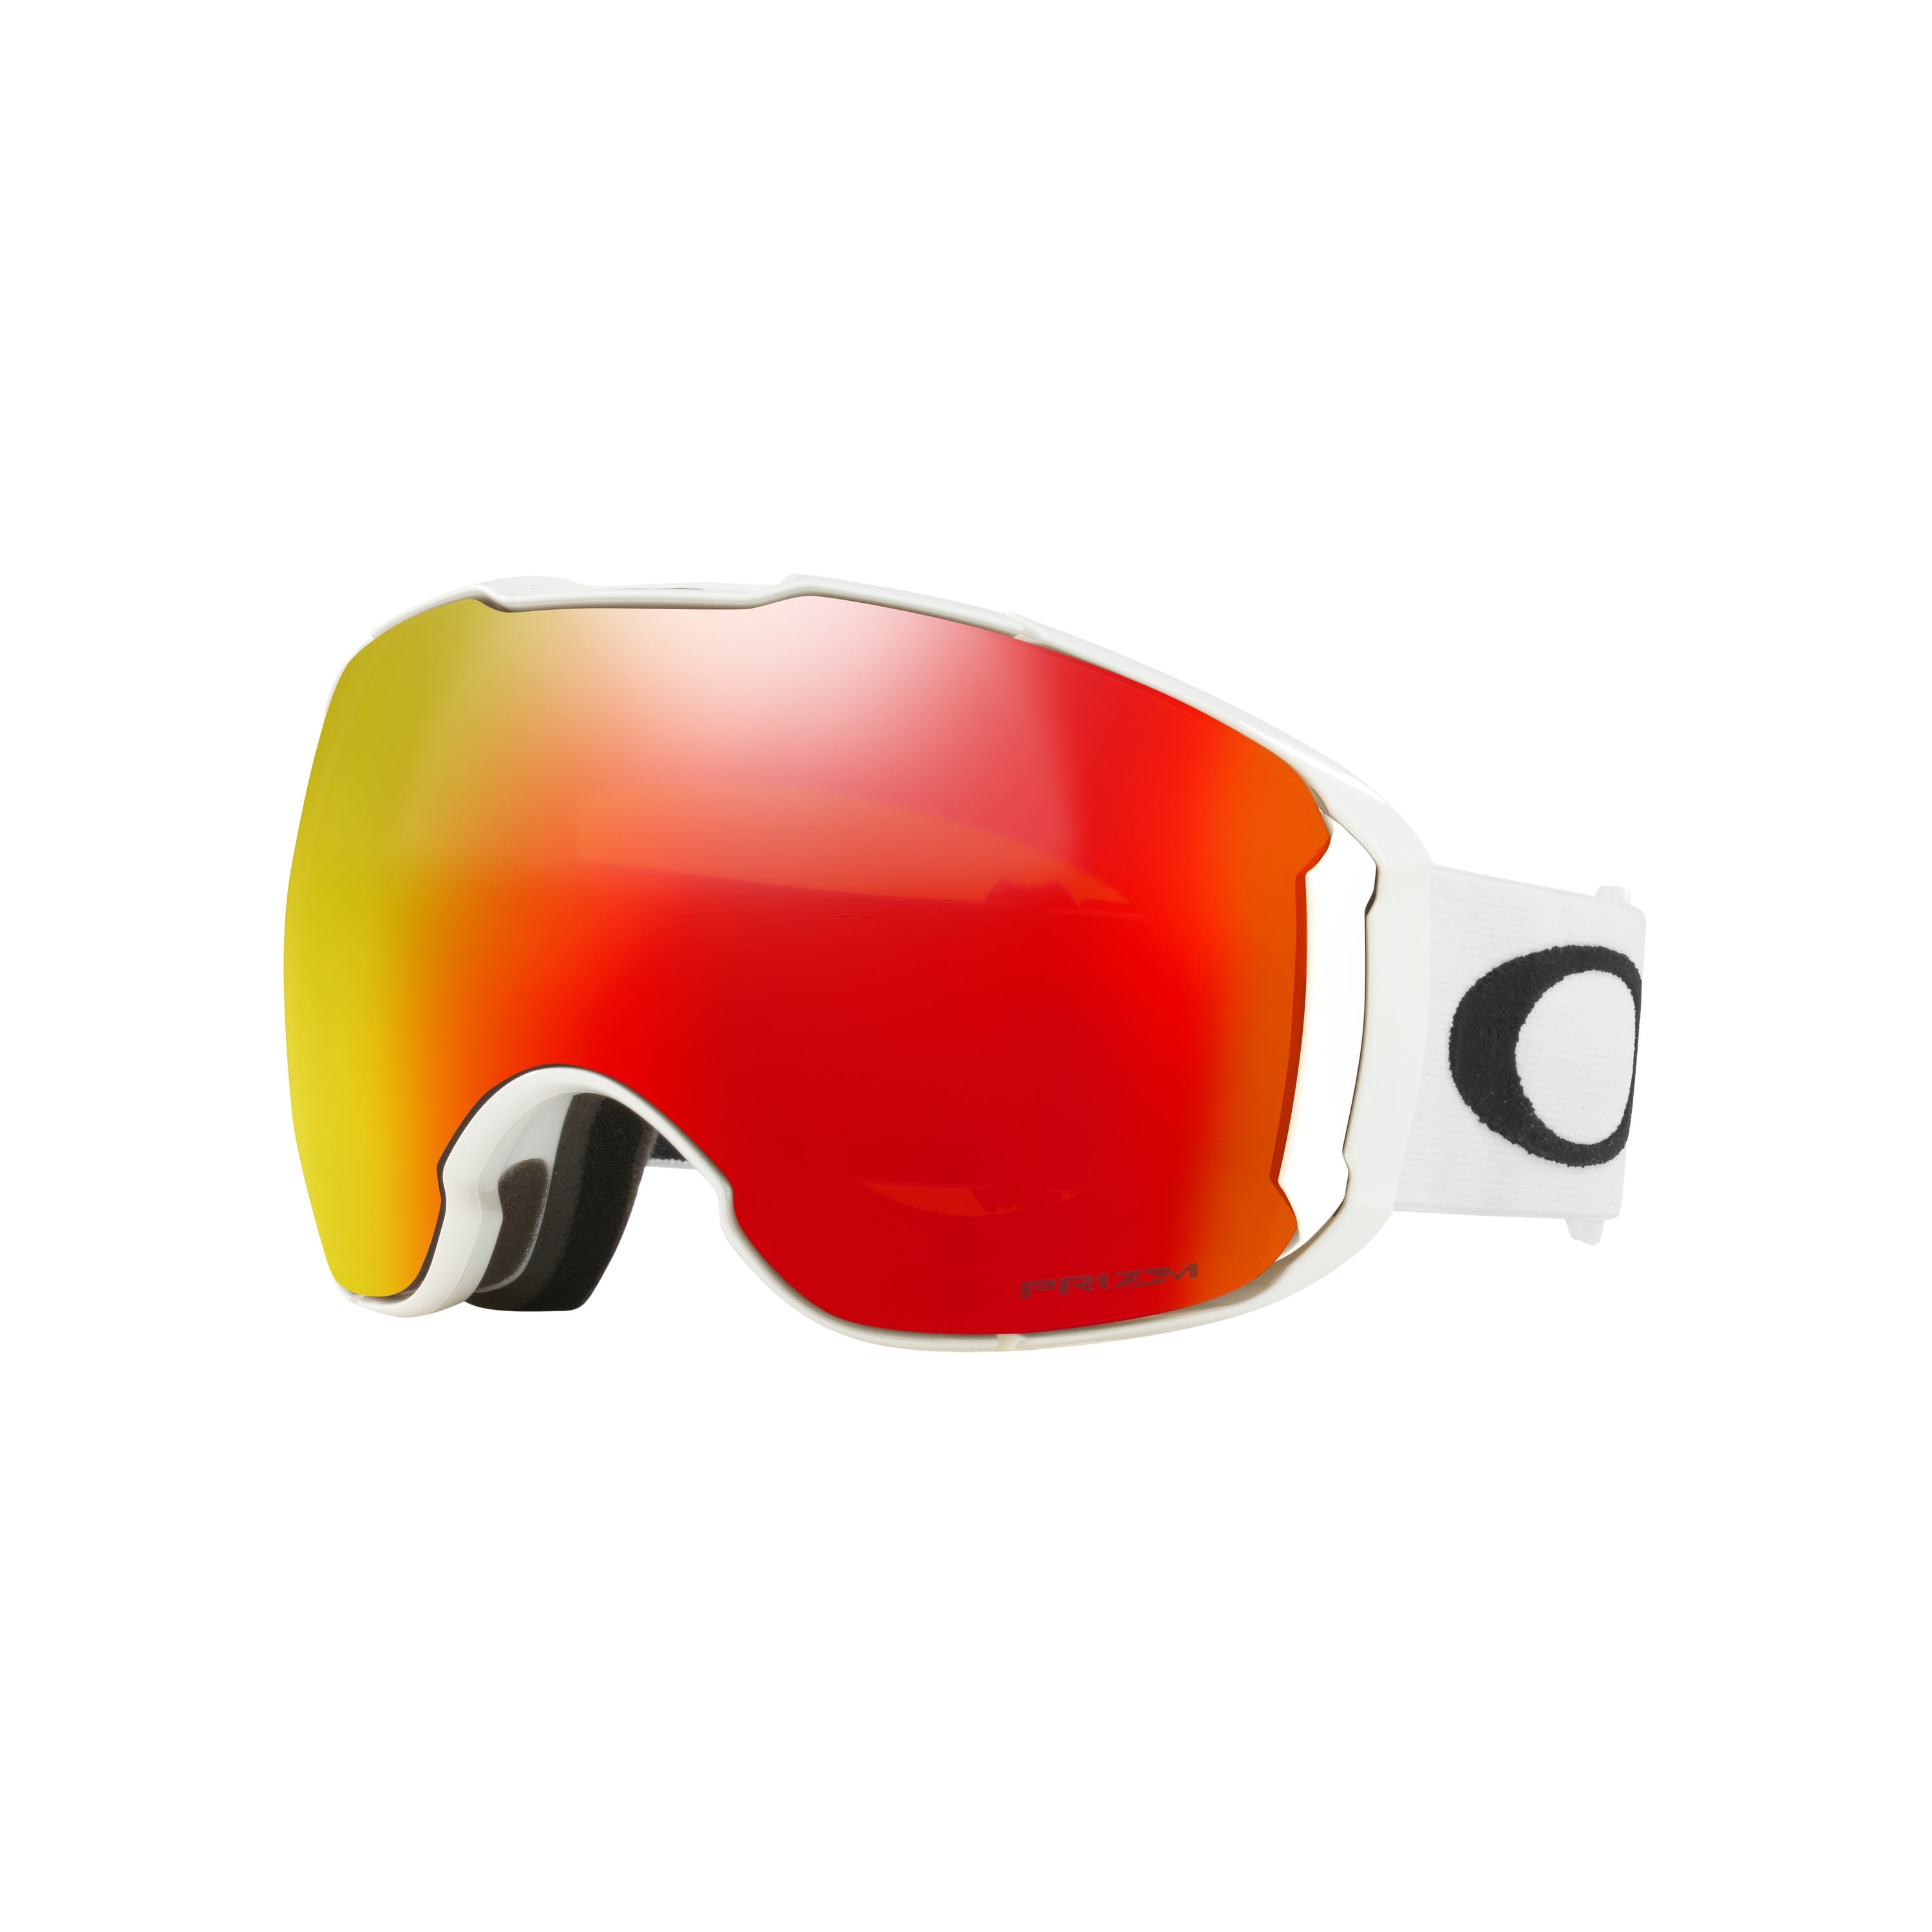 Buy Oakley Airbrake XL from Outnorth